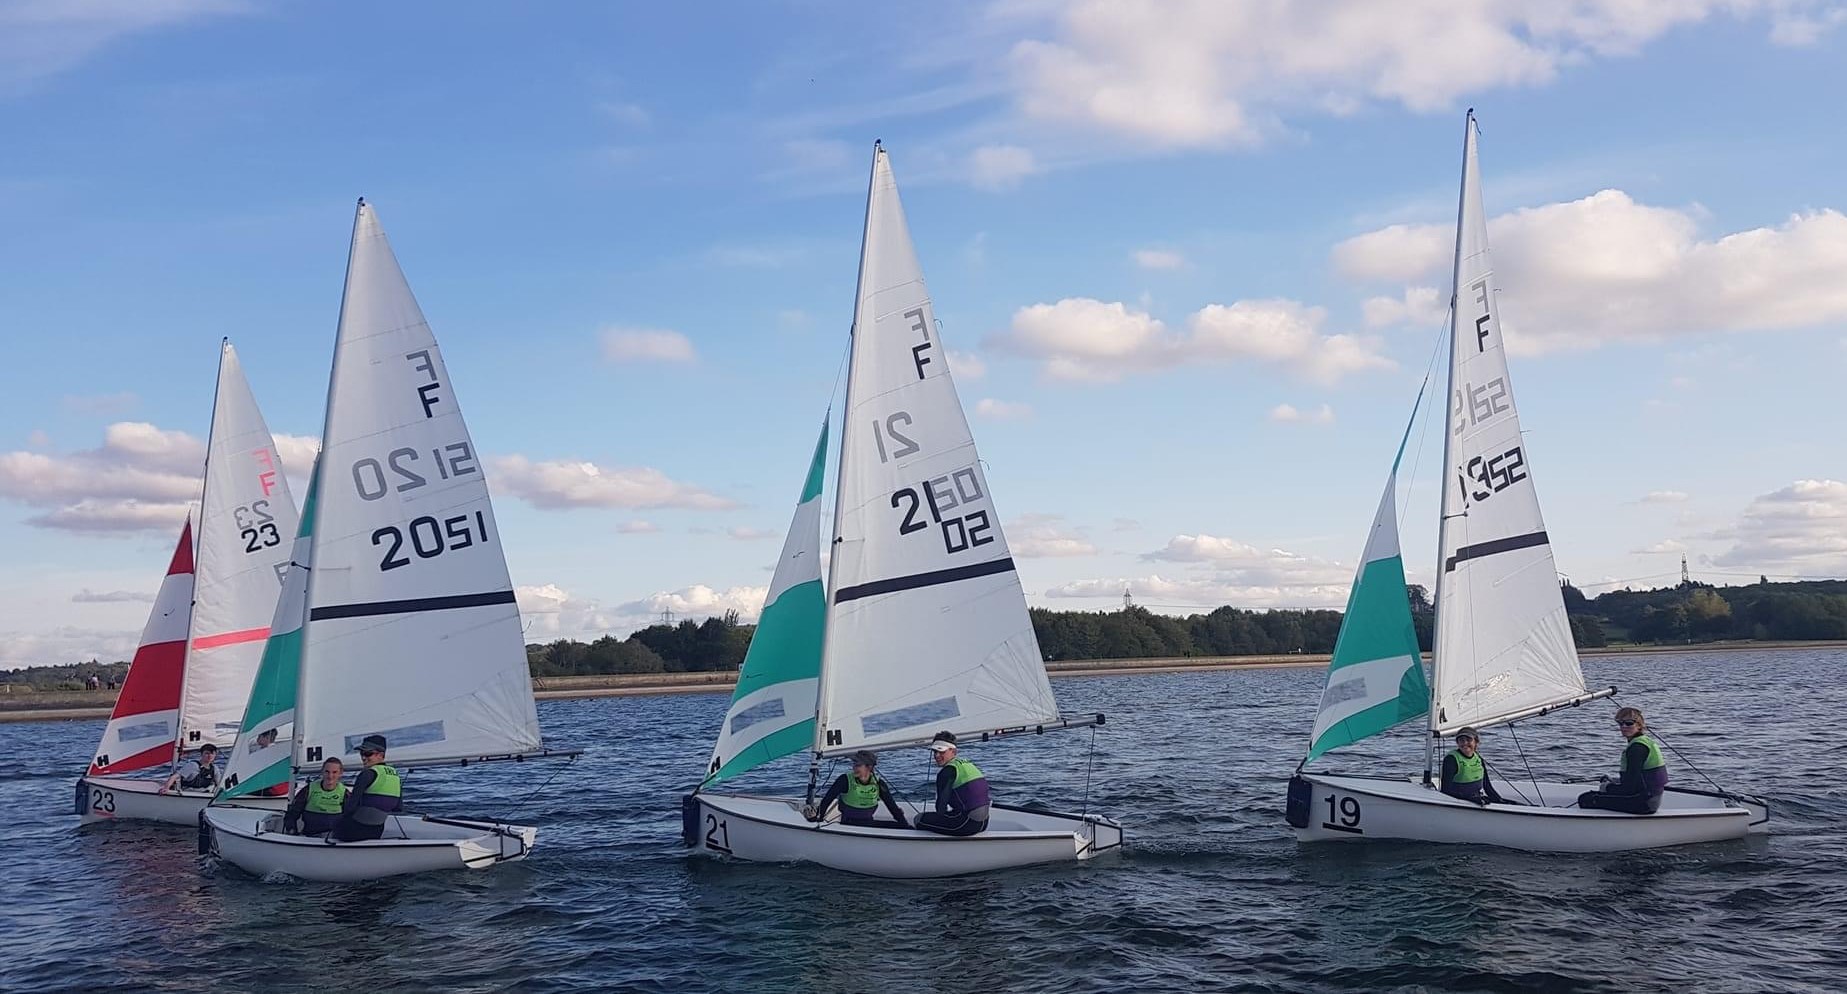 Rutland youth sailors on the water at the 2021 Eric Twiname Team Racing Championships at Oxford.